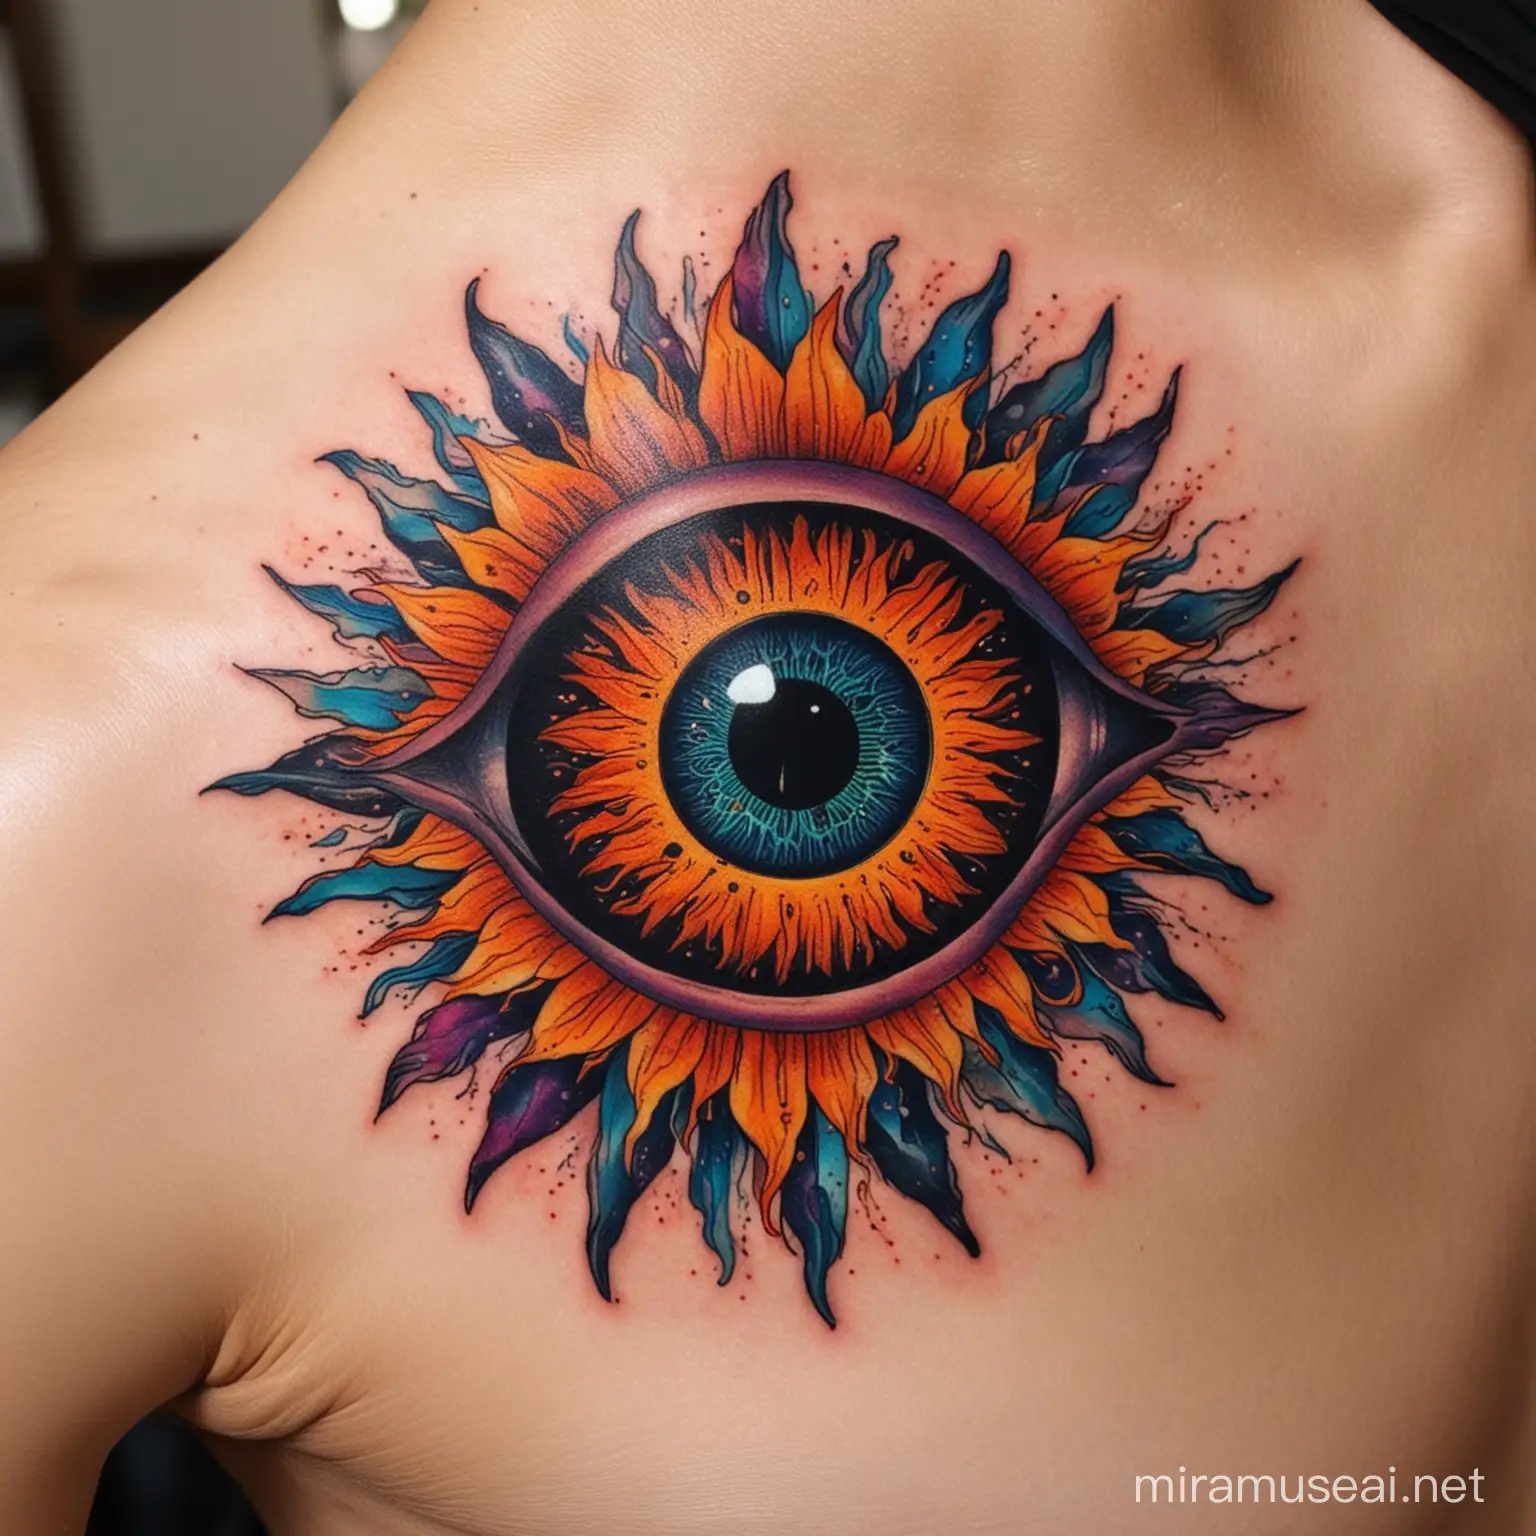 very small tattoo of the eye inside of the sun on the internal biceps with digital psychedelia, intricate details, and vibrant colors, that blends the mystical with the futuristic, both captivating and thought-provoking, embodying the unique blend of the organic and the synthetic